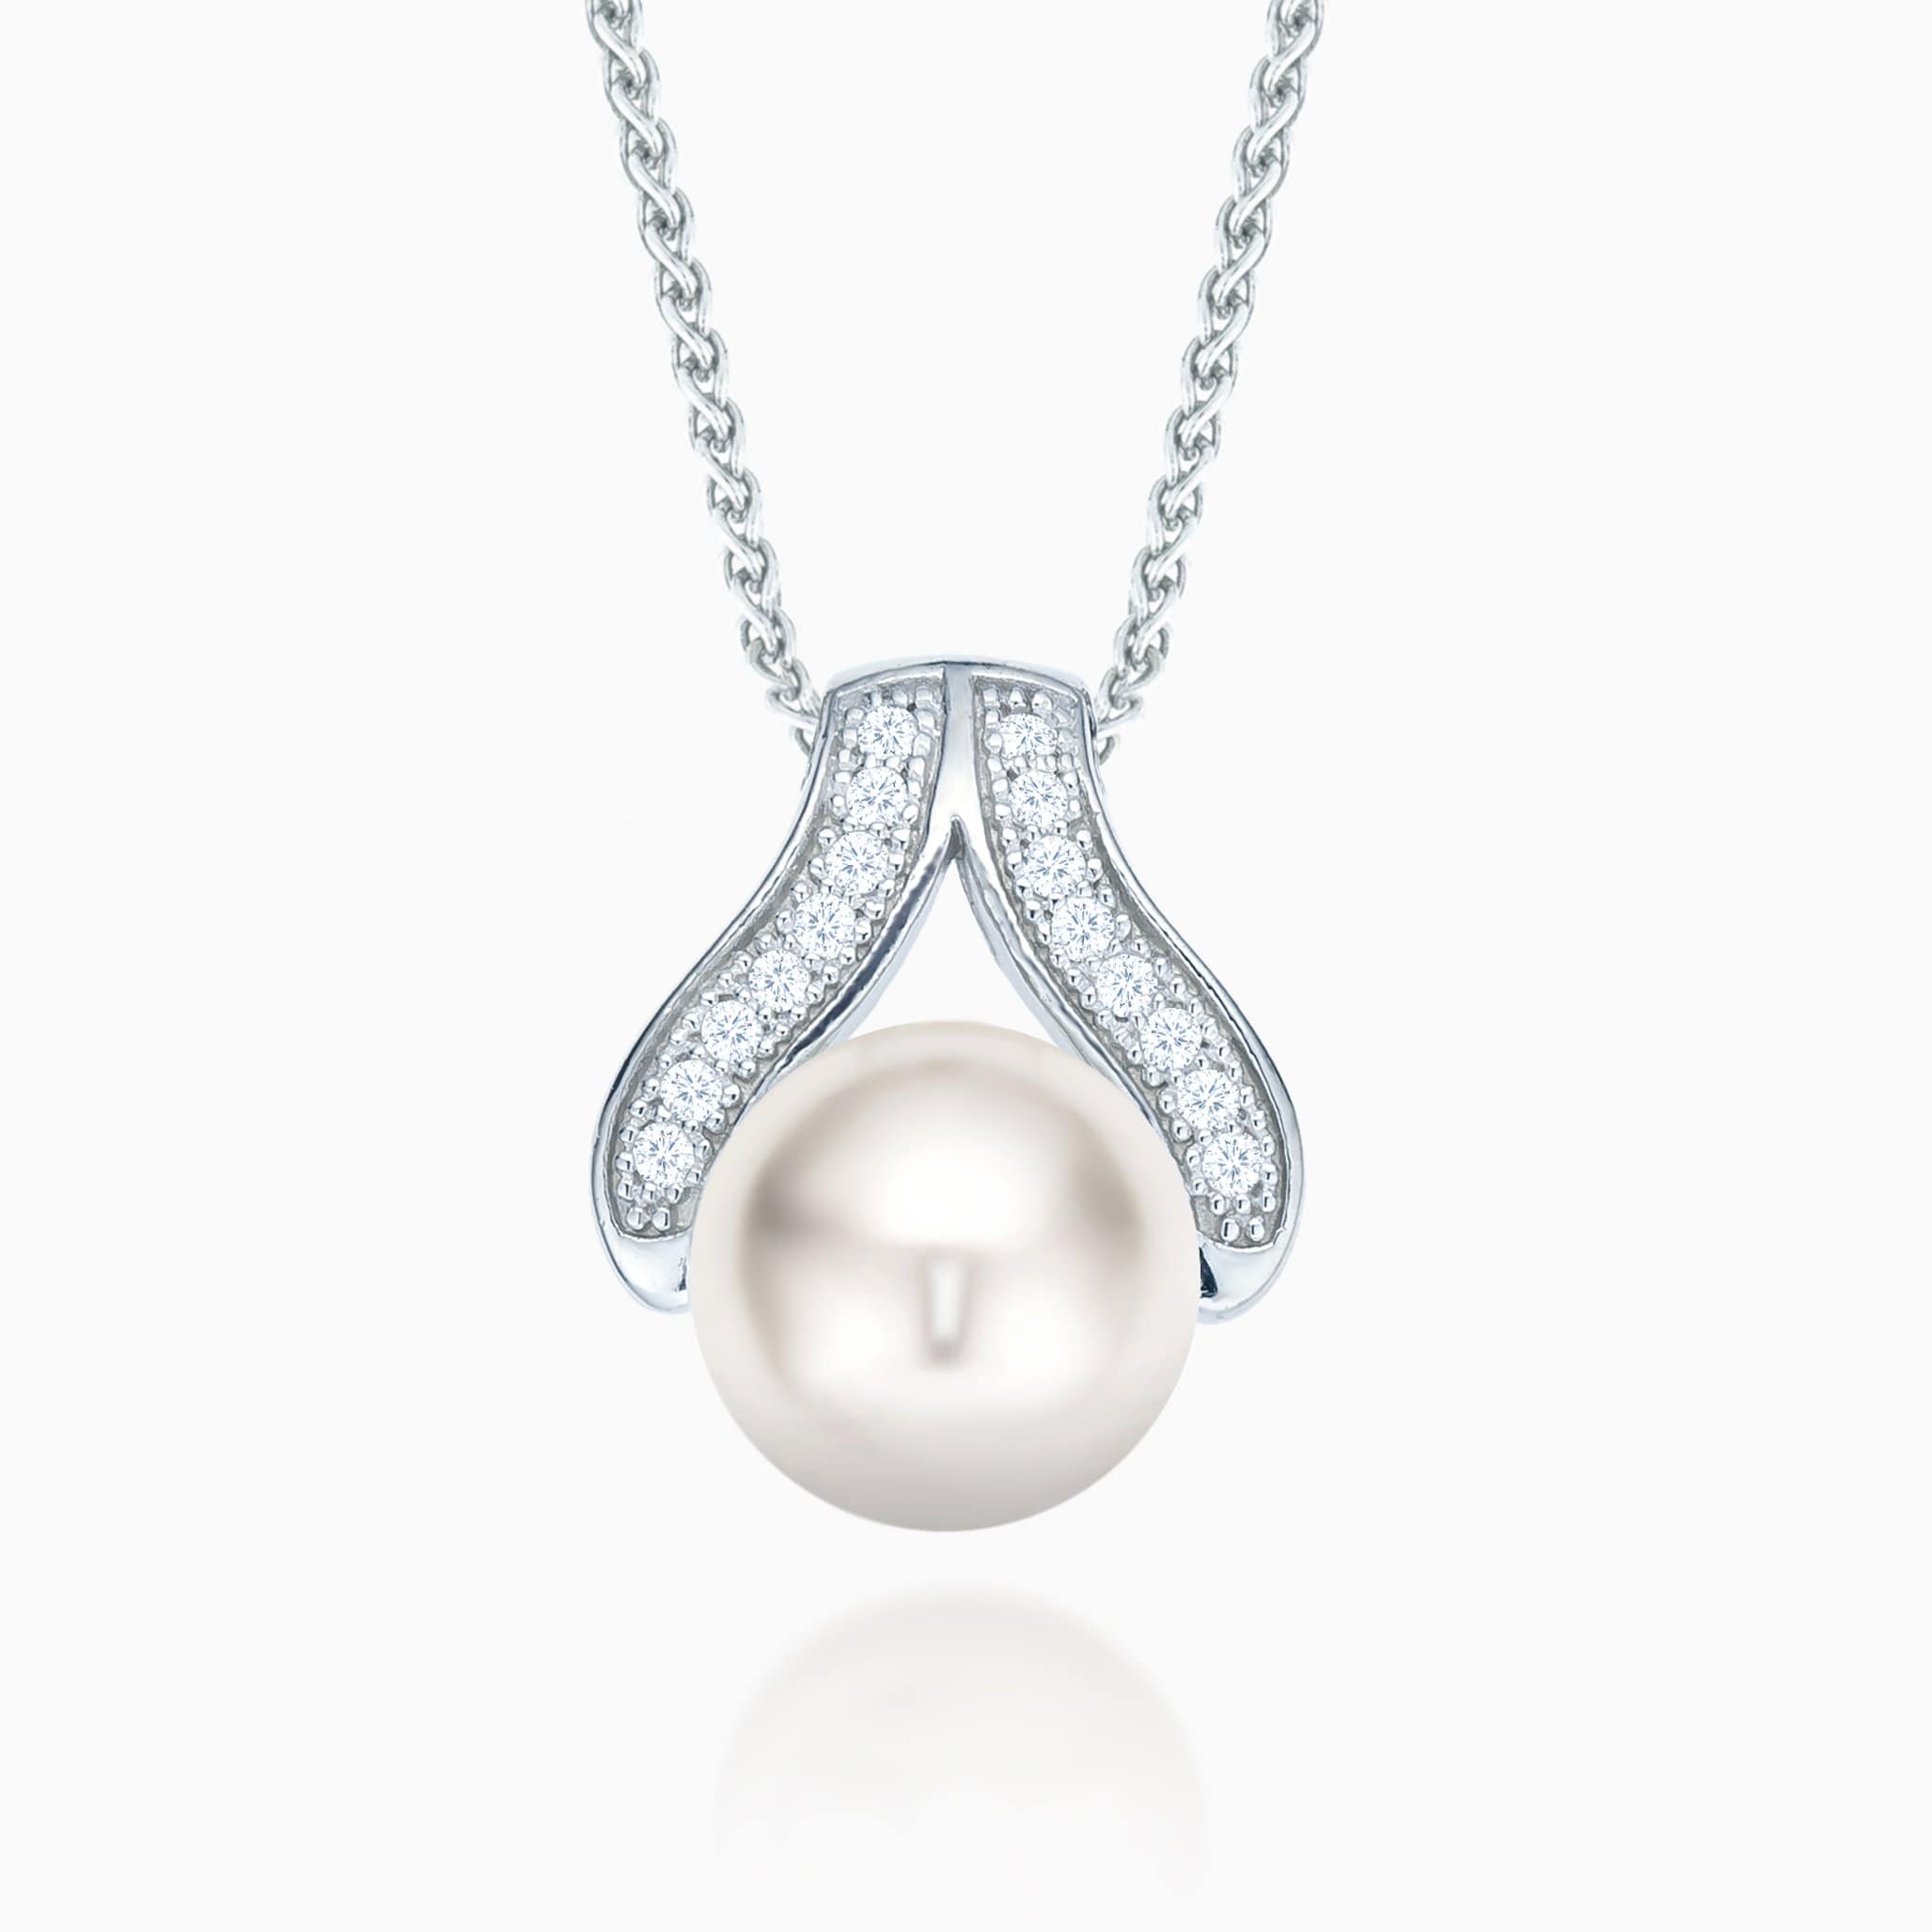 Lynora Jewellery Necklace Sterling Silver / Pearl Pearl Pendant